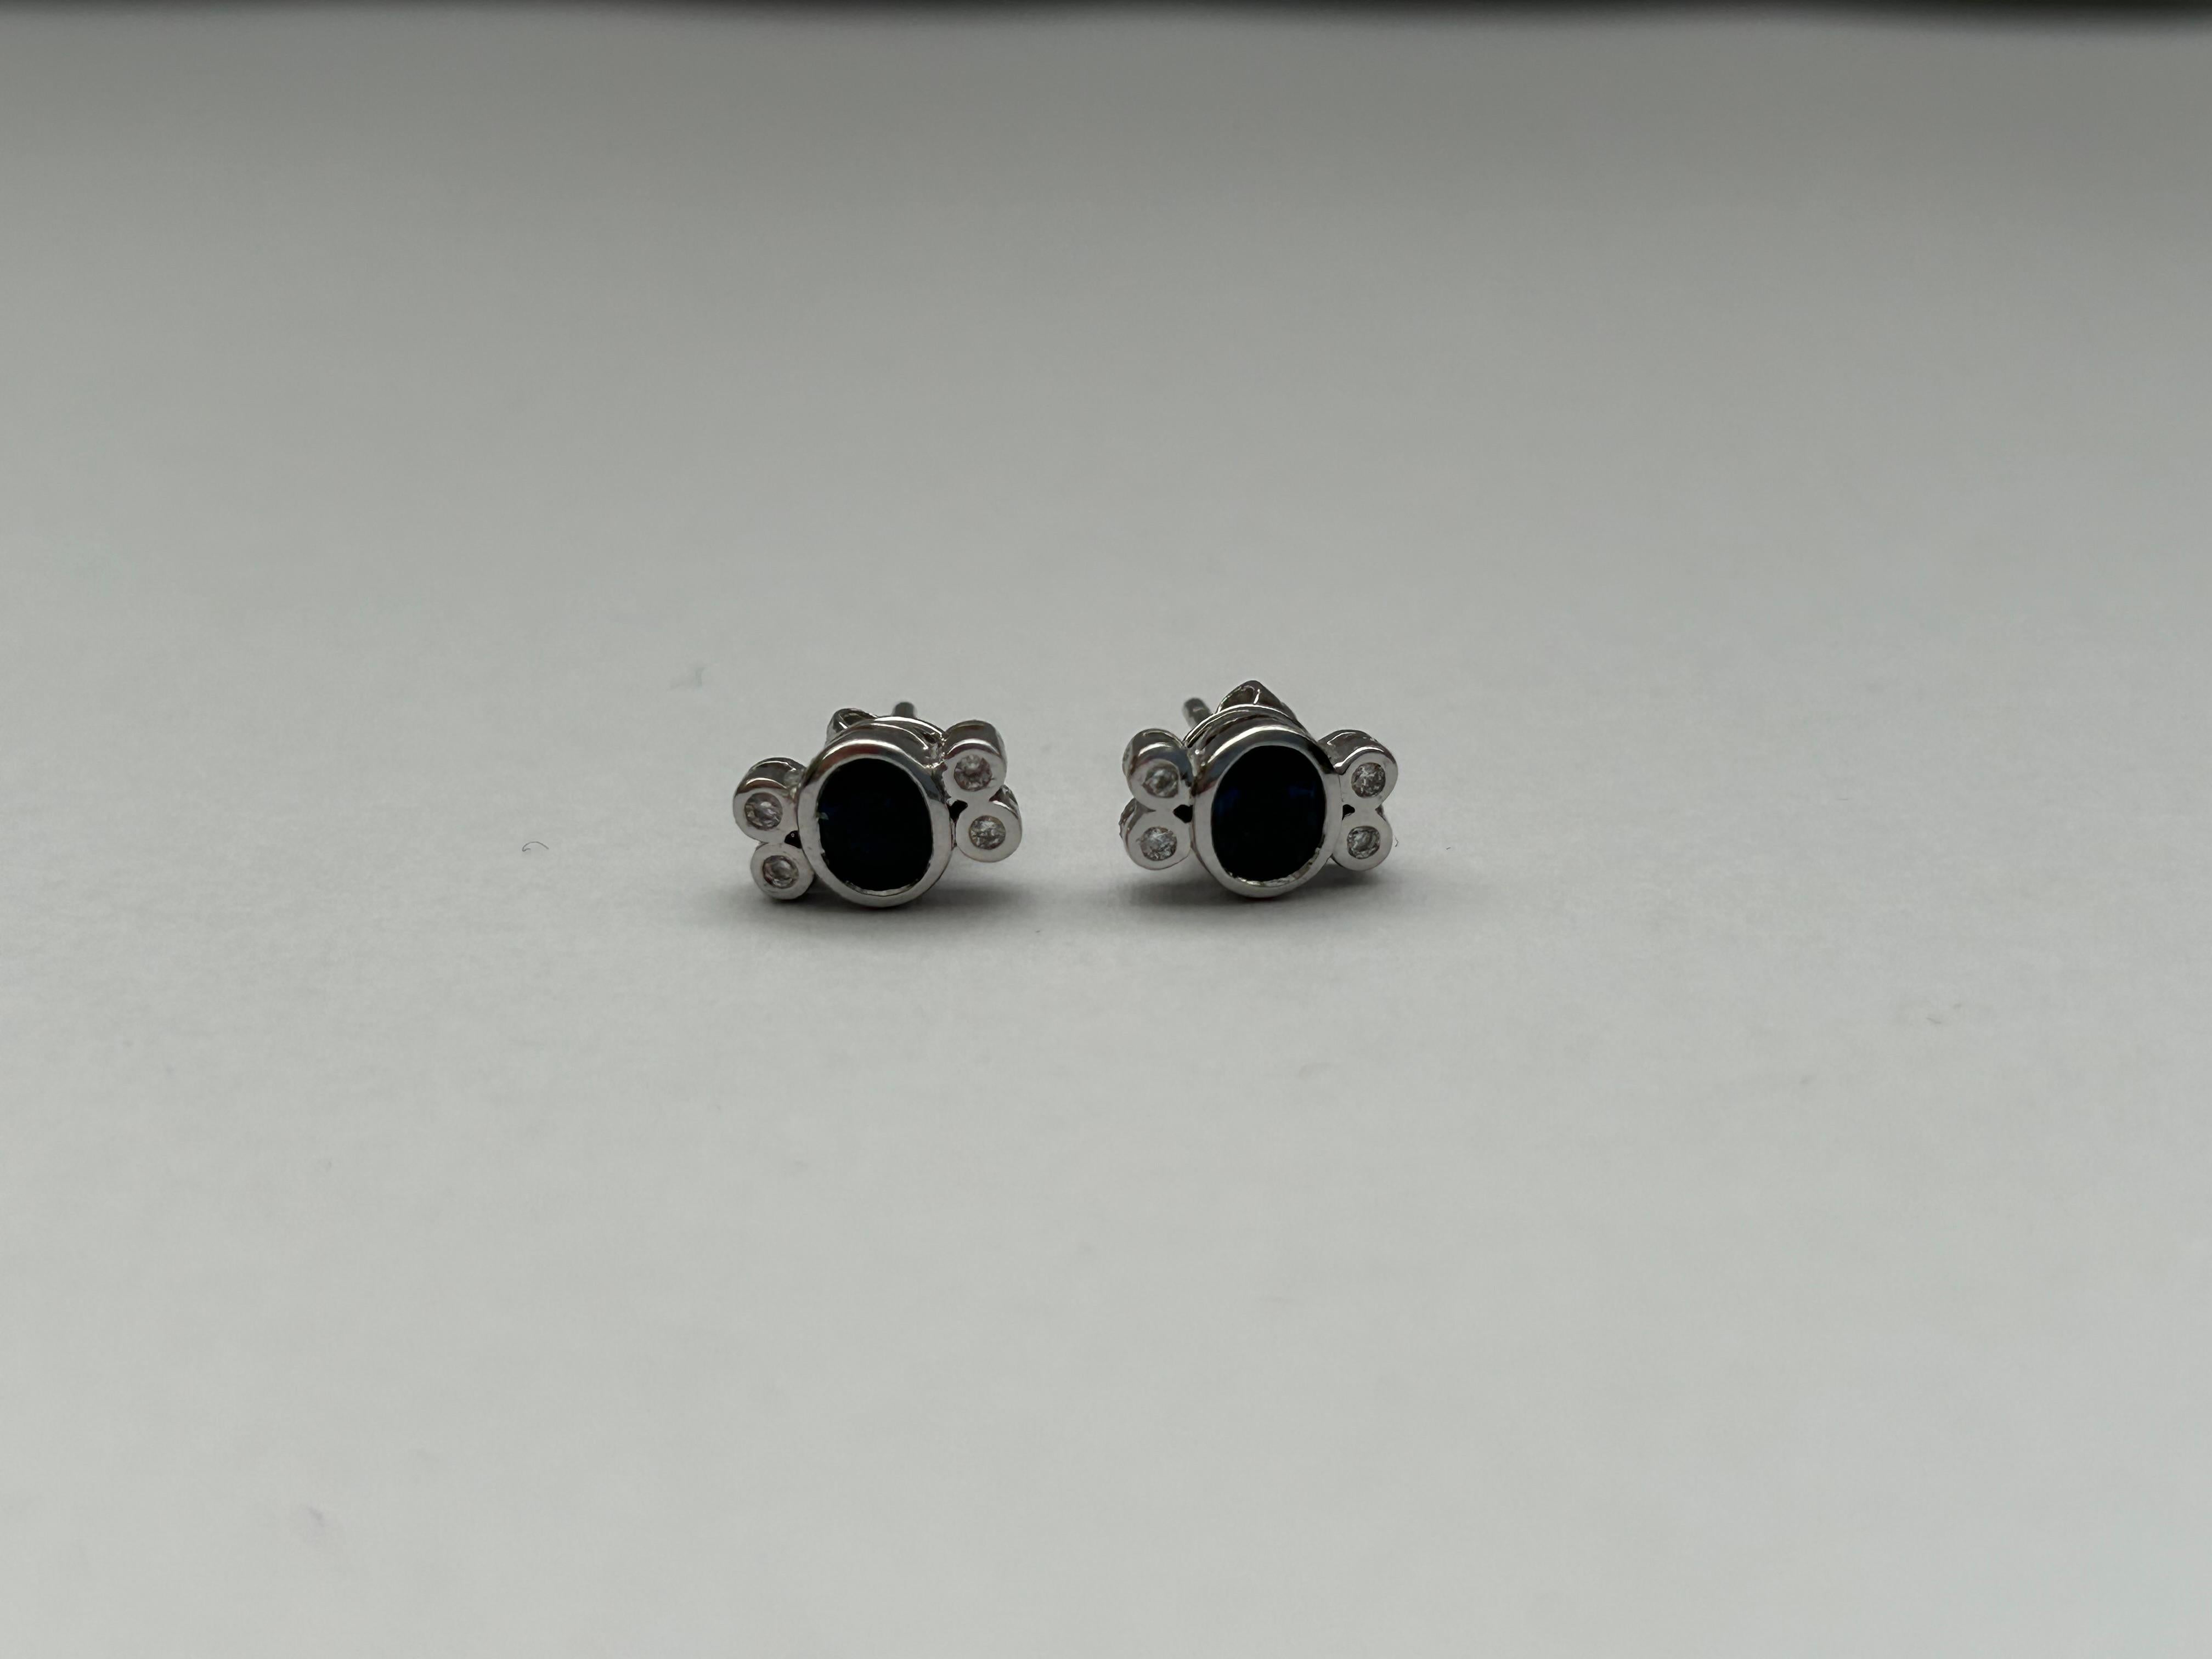 These elegant diamond and sapphire ear studs are set in 18ct white gold and measure 10mm x 6mm.